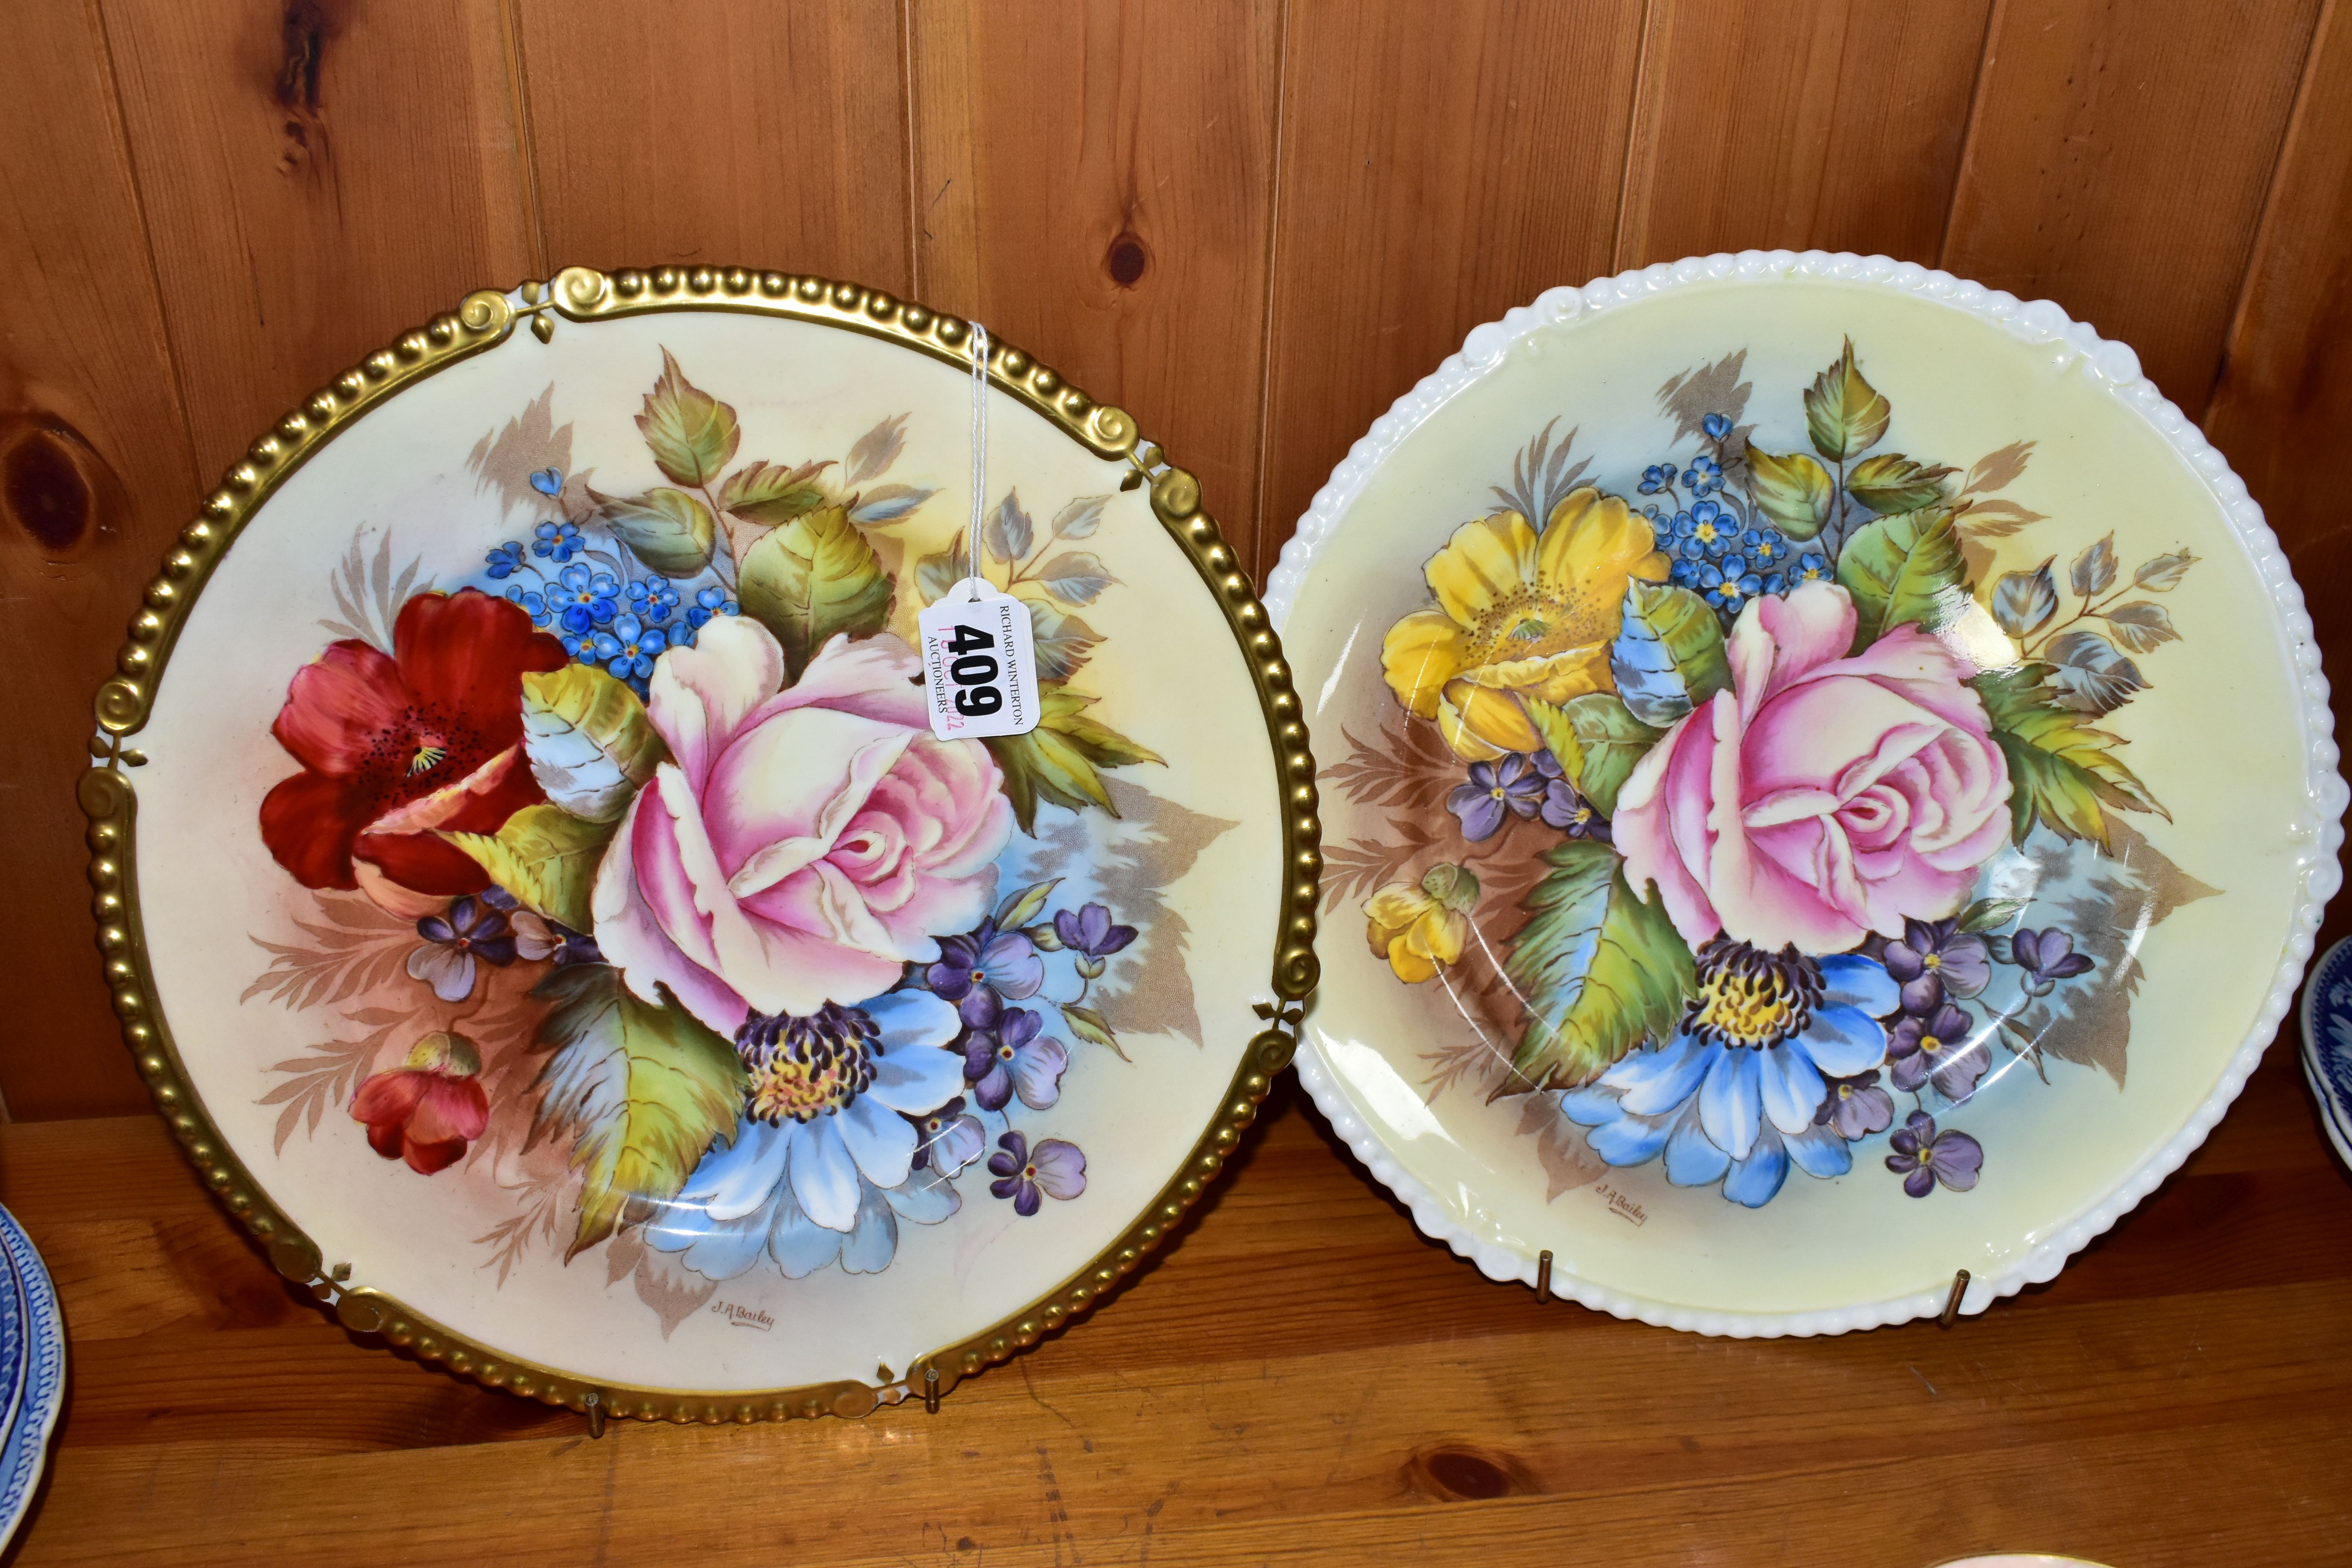 TWO AYNSLEY WAVY RIMMED FLORAL DECORATED CABINET PLATES BY JOSEPH A. BAILEY, bear signature, pattern